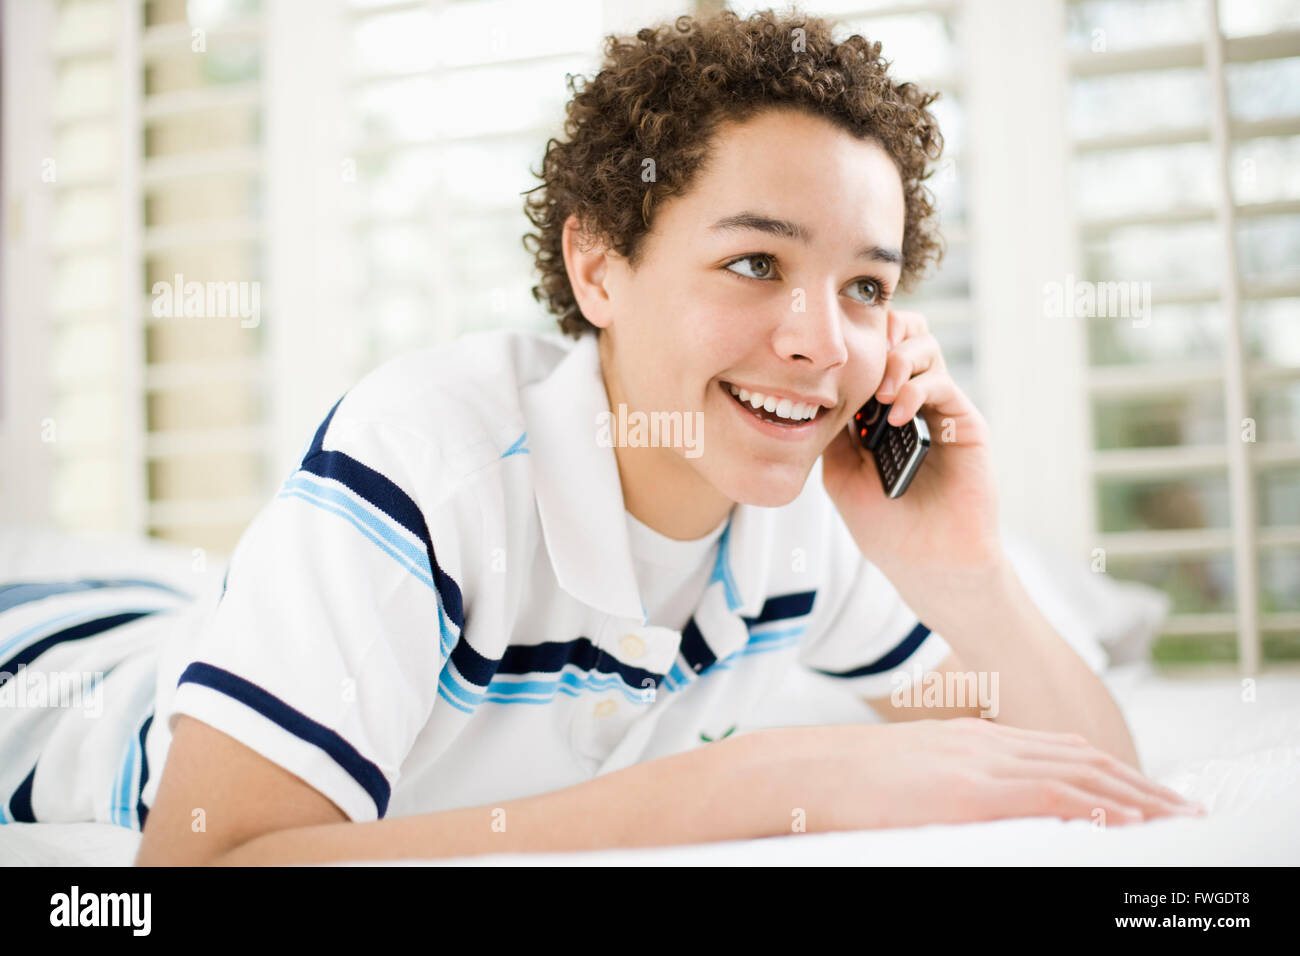 A boy talking on a mobile phone. Stock Photo